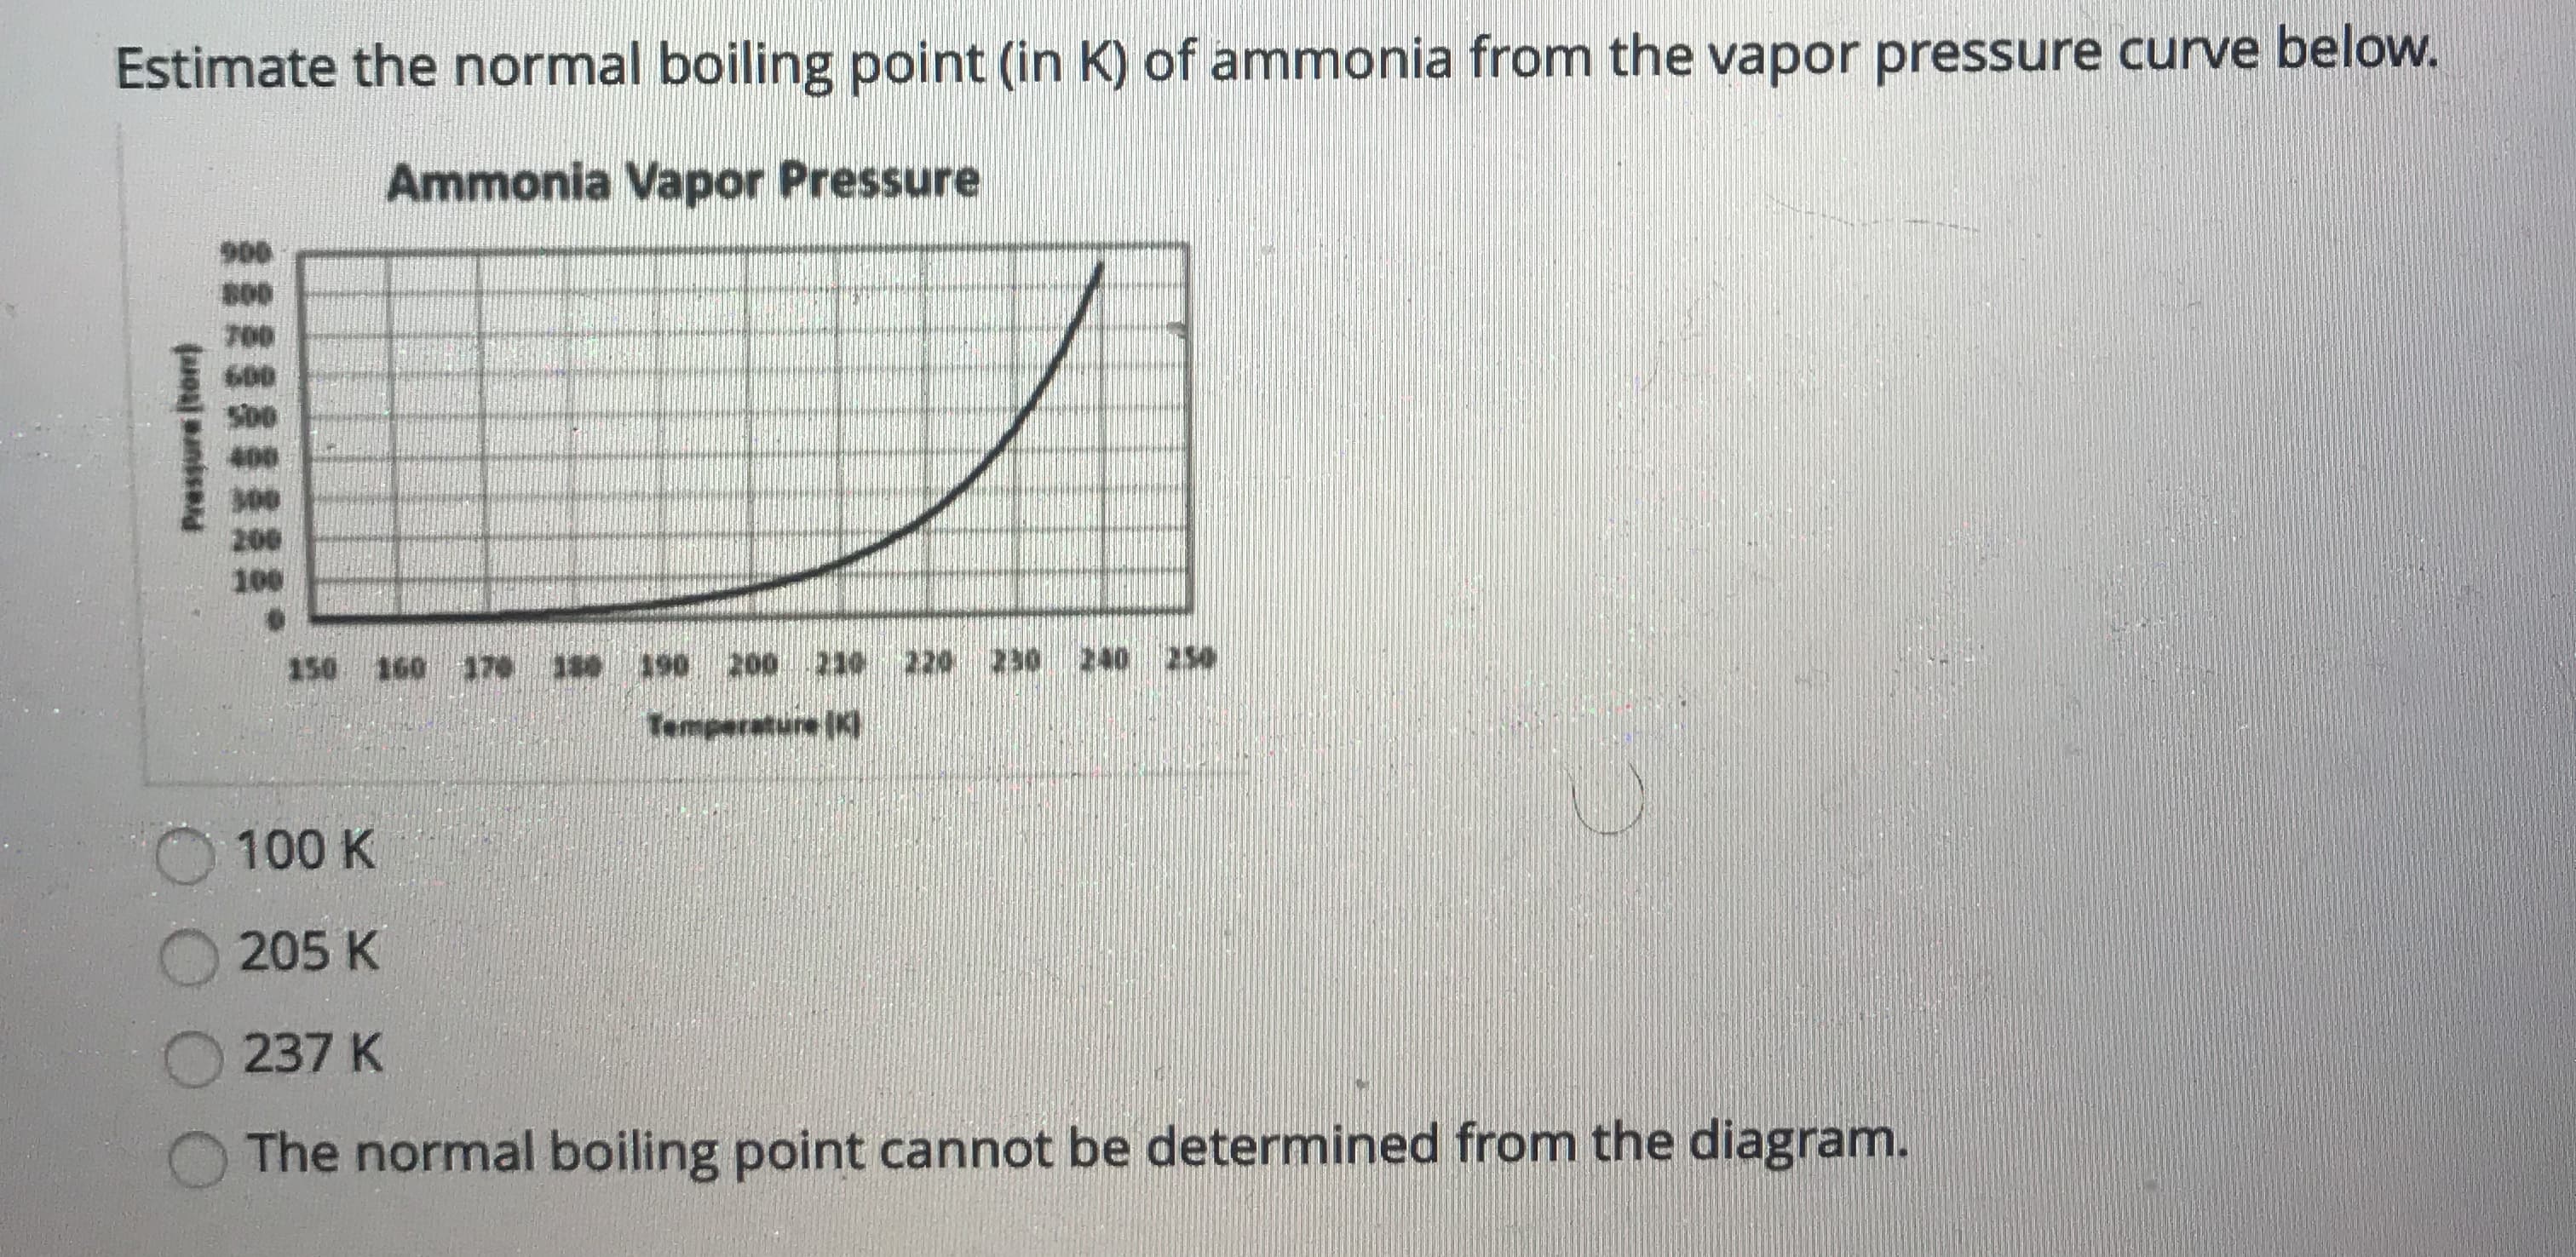 Estimate the normal boiling point (in K) of ammonia from the vapor pressure curve below.
